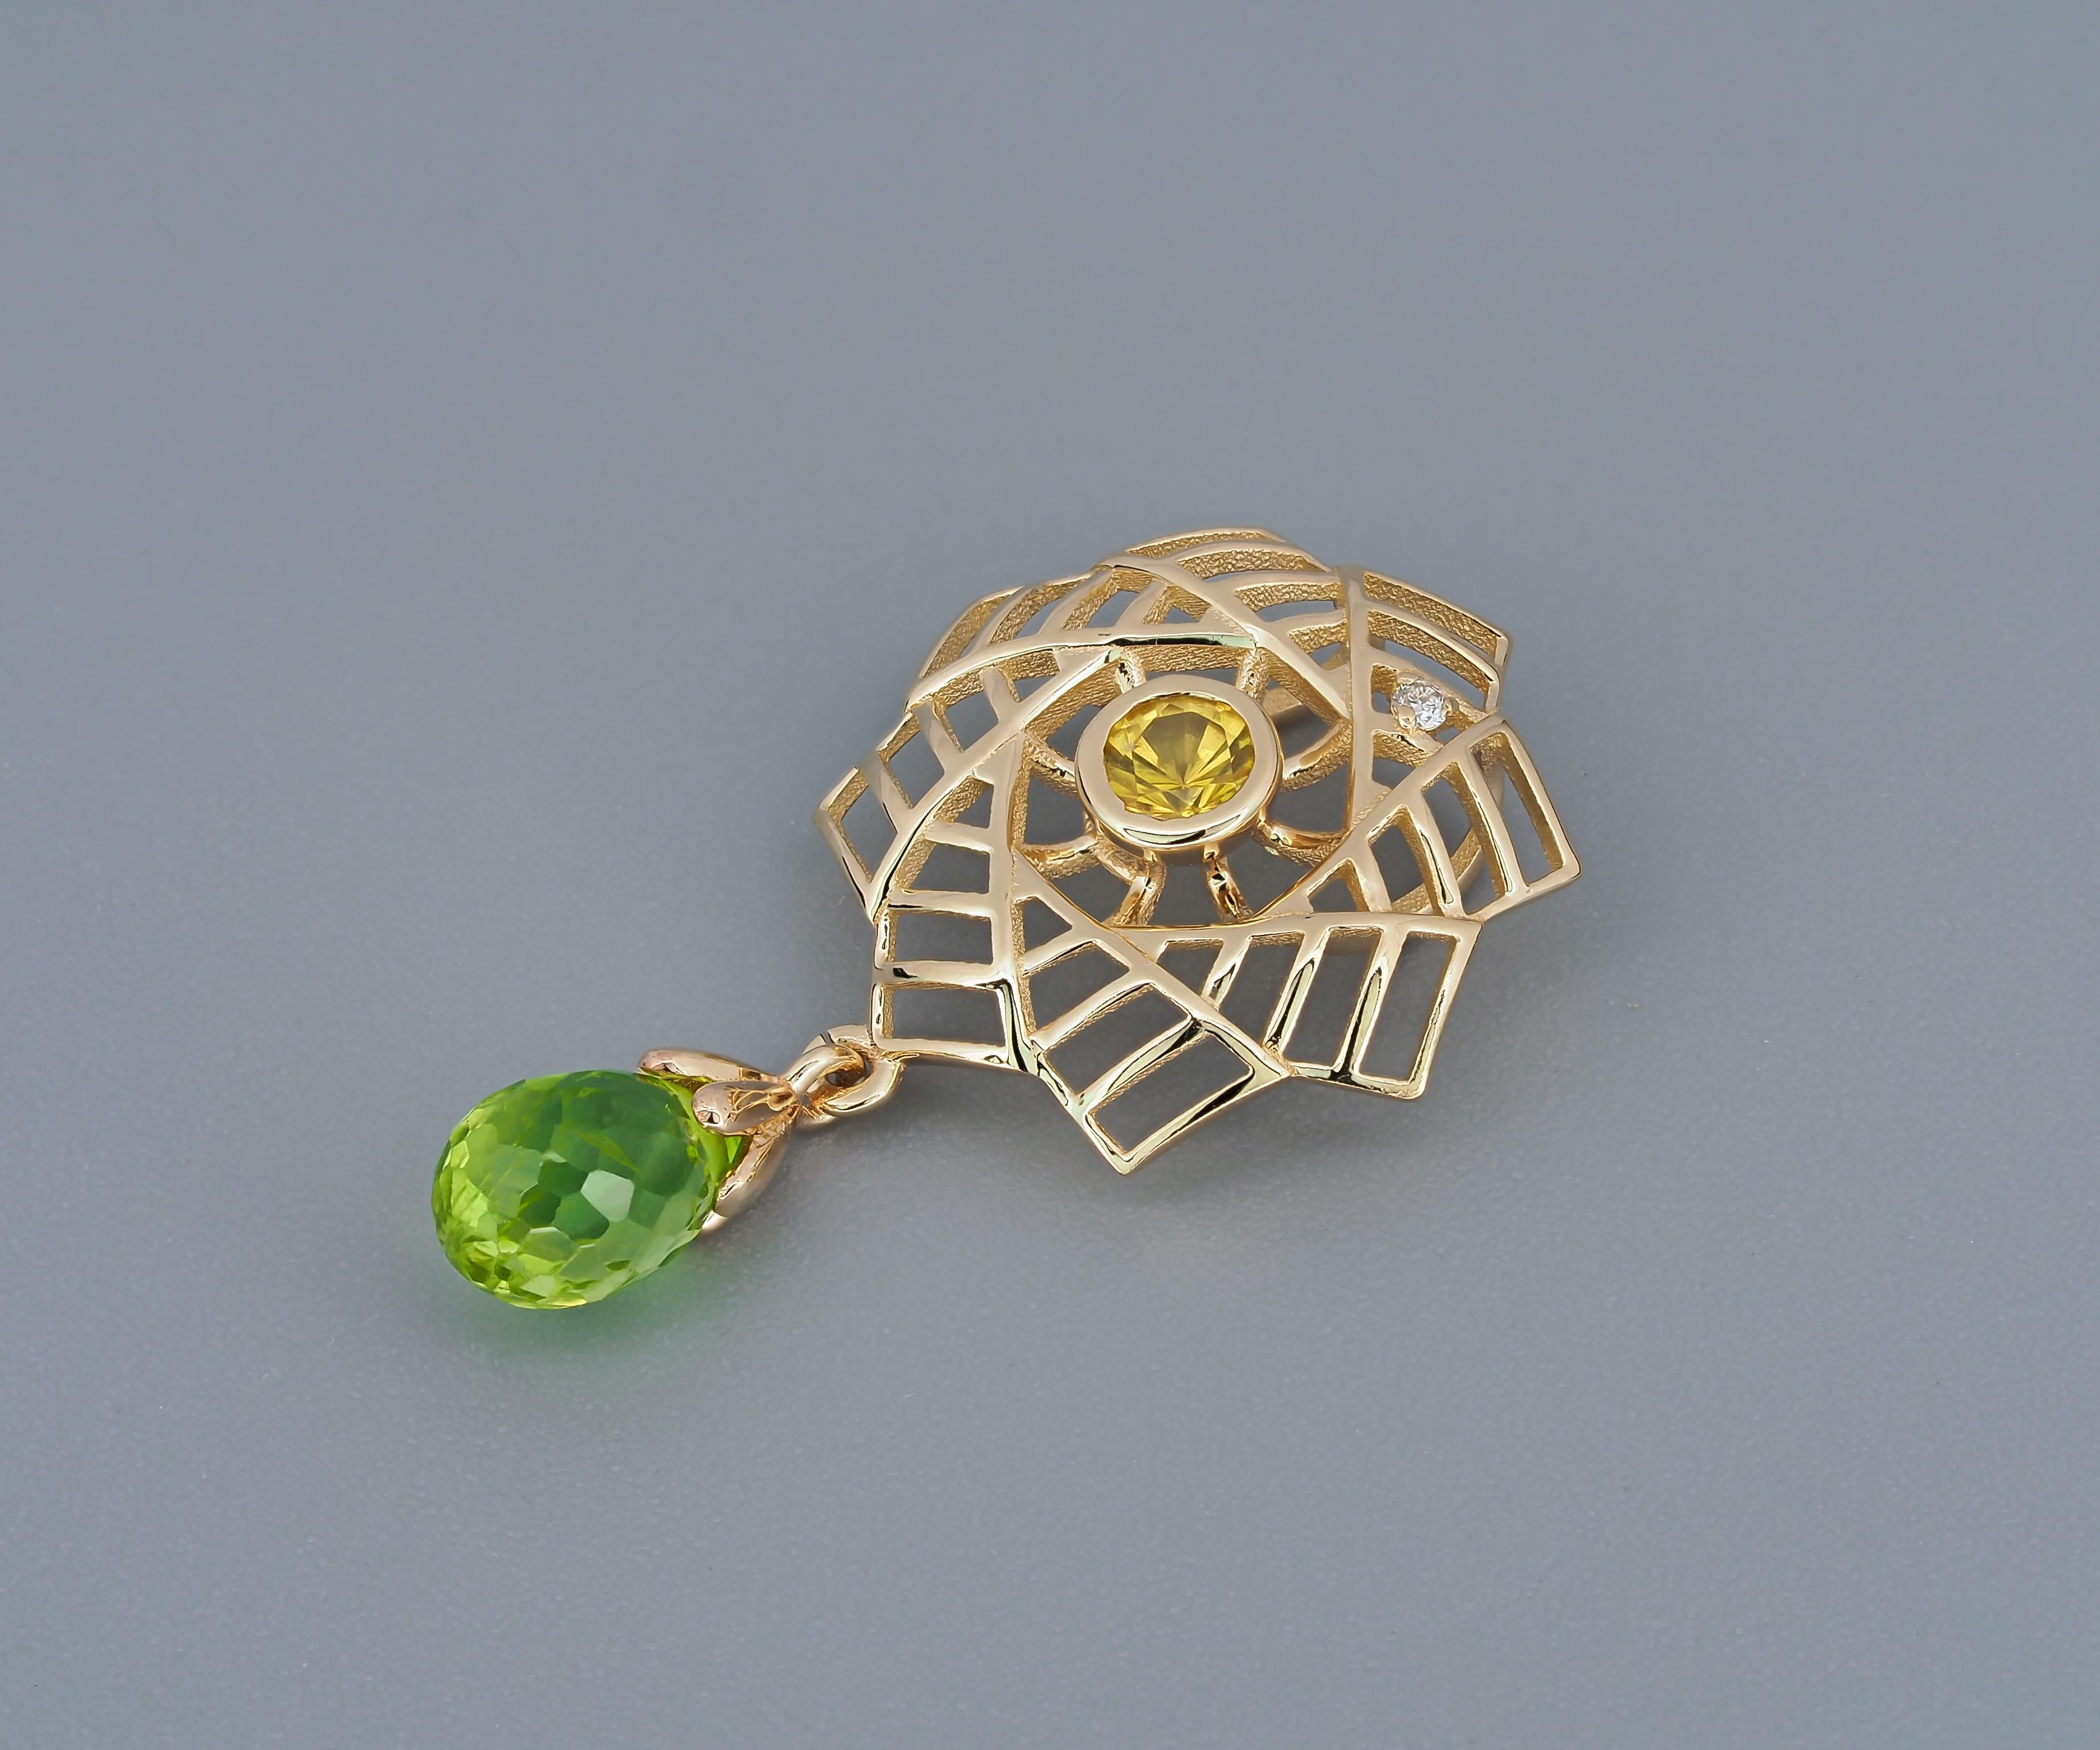 Briolette peridot pendant in 14k gold. 
Apple green peridot, Yellow sapphire pendant. Briolette gemstone pendant. Colorful gemstones charm.

Material: 14k gold
Weight: 1.55 g.
Pendant size: 25x13.46 mm.

Peridot: 1 pieces, green - color, briolette